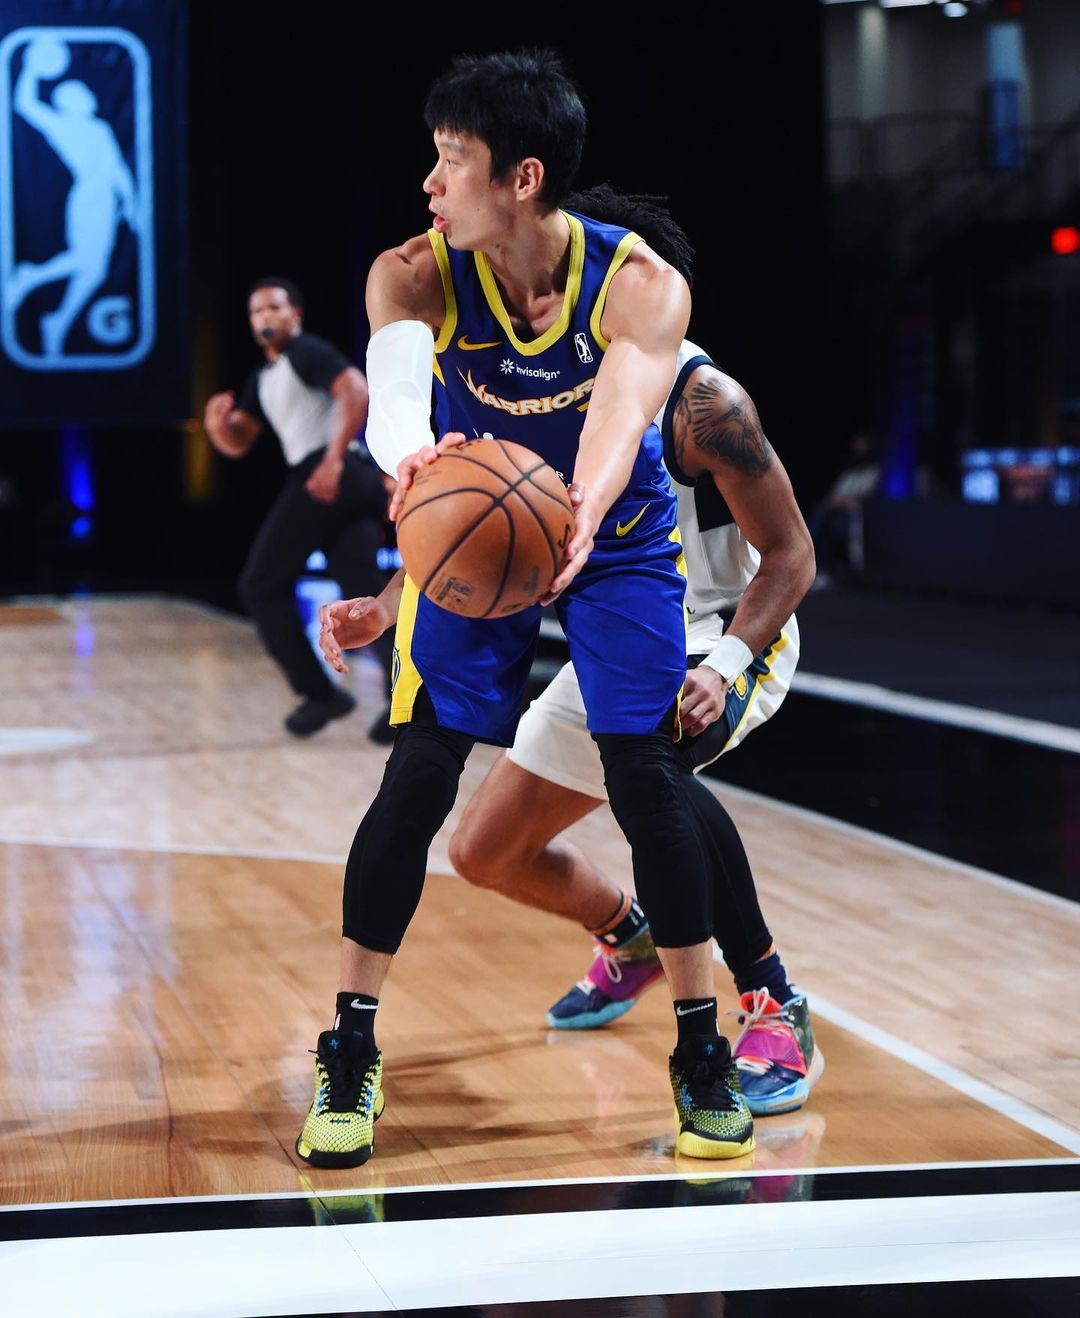 NBA's G League investigating after Jeremy Lin said he was called